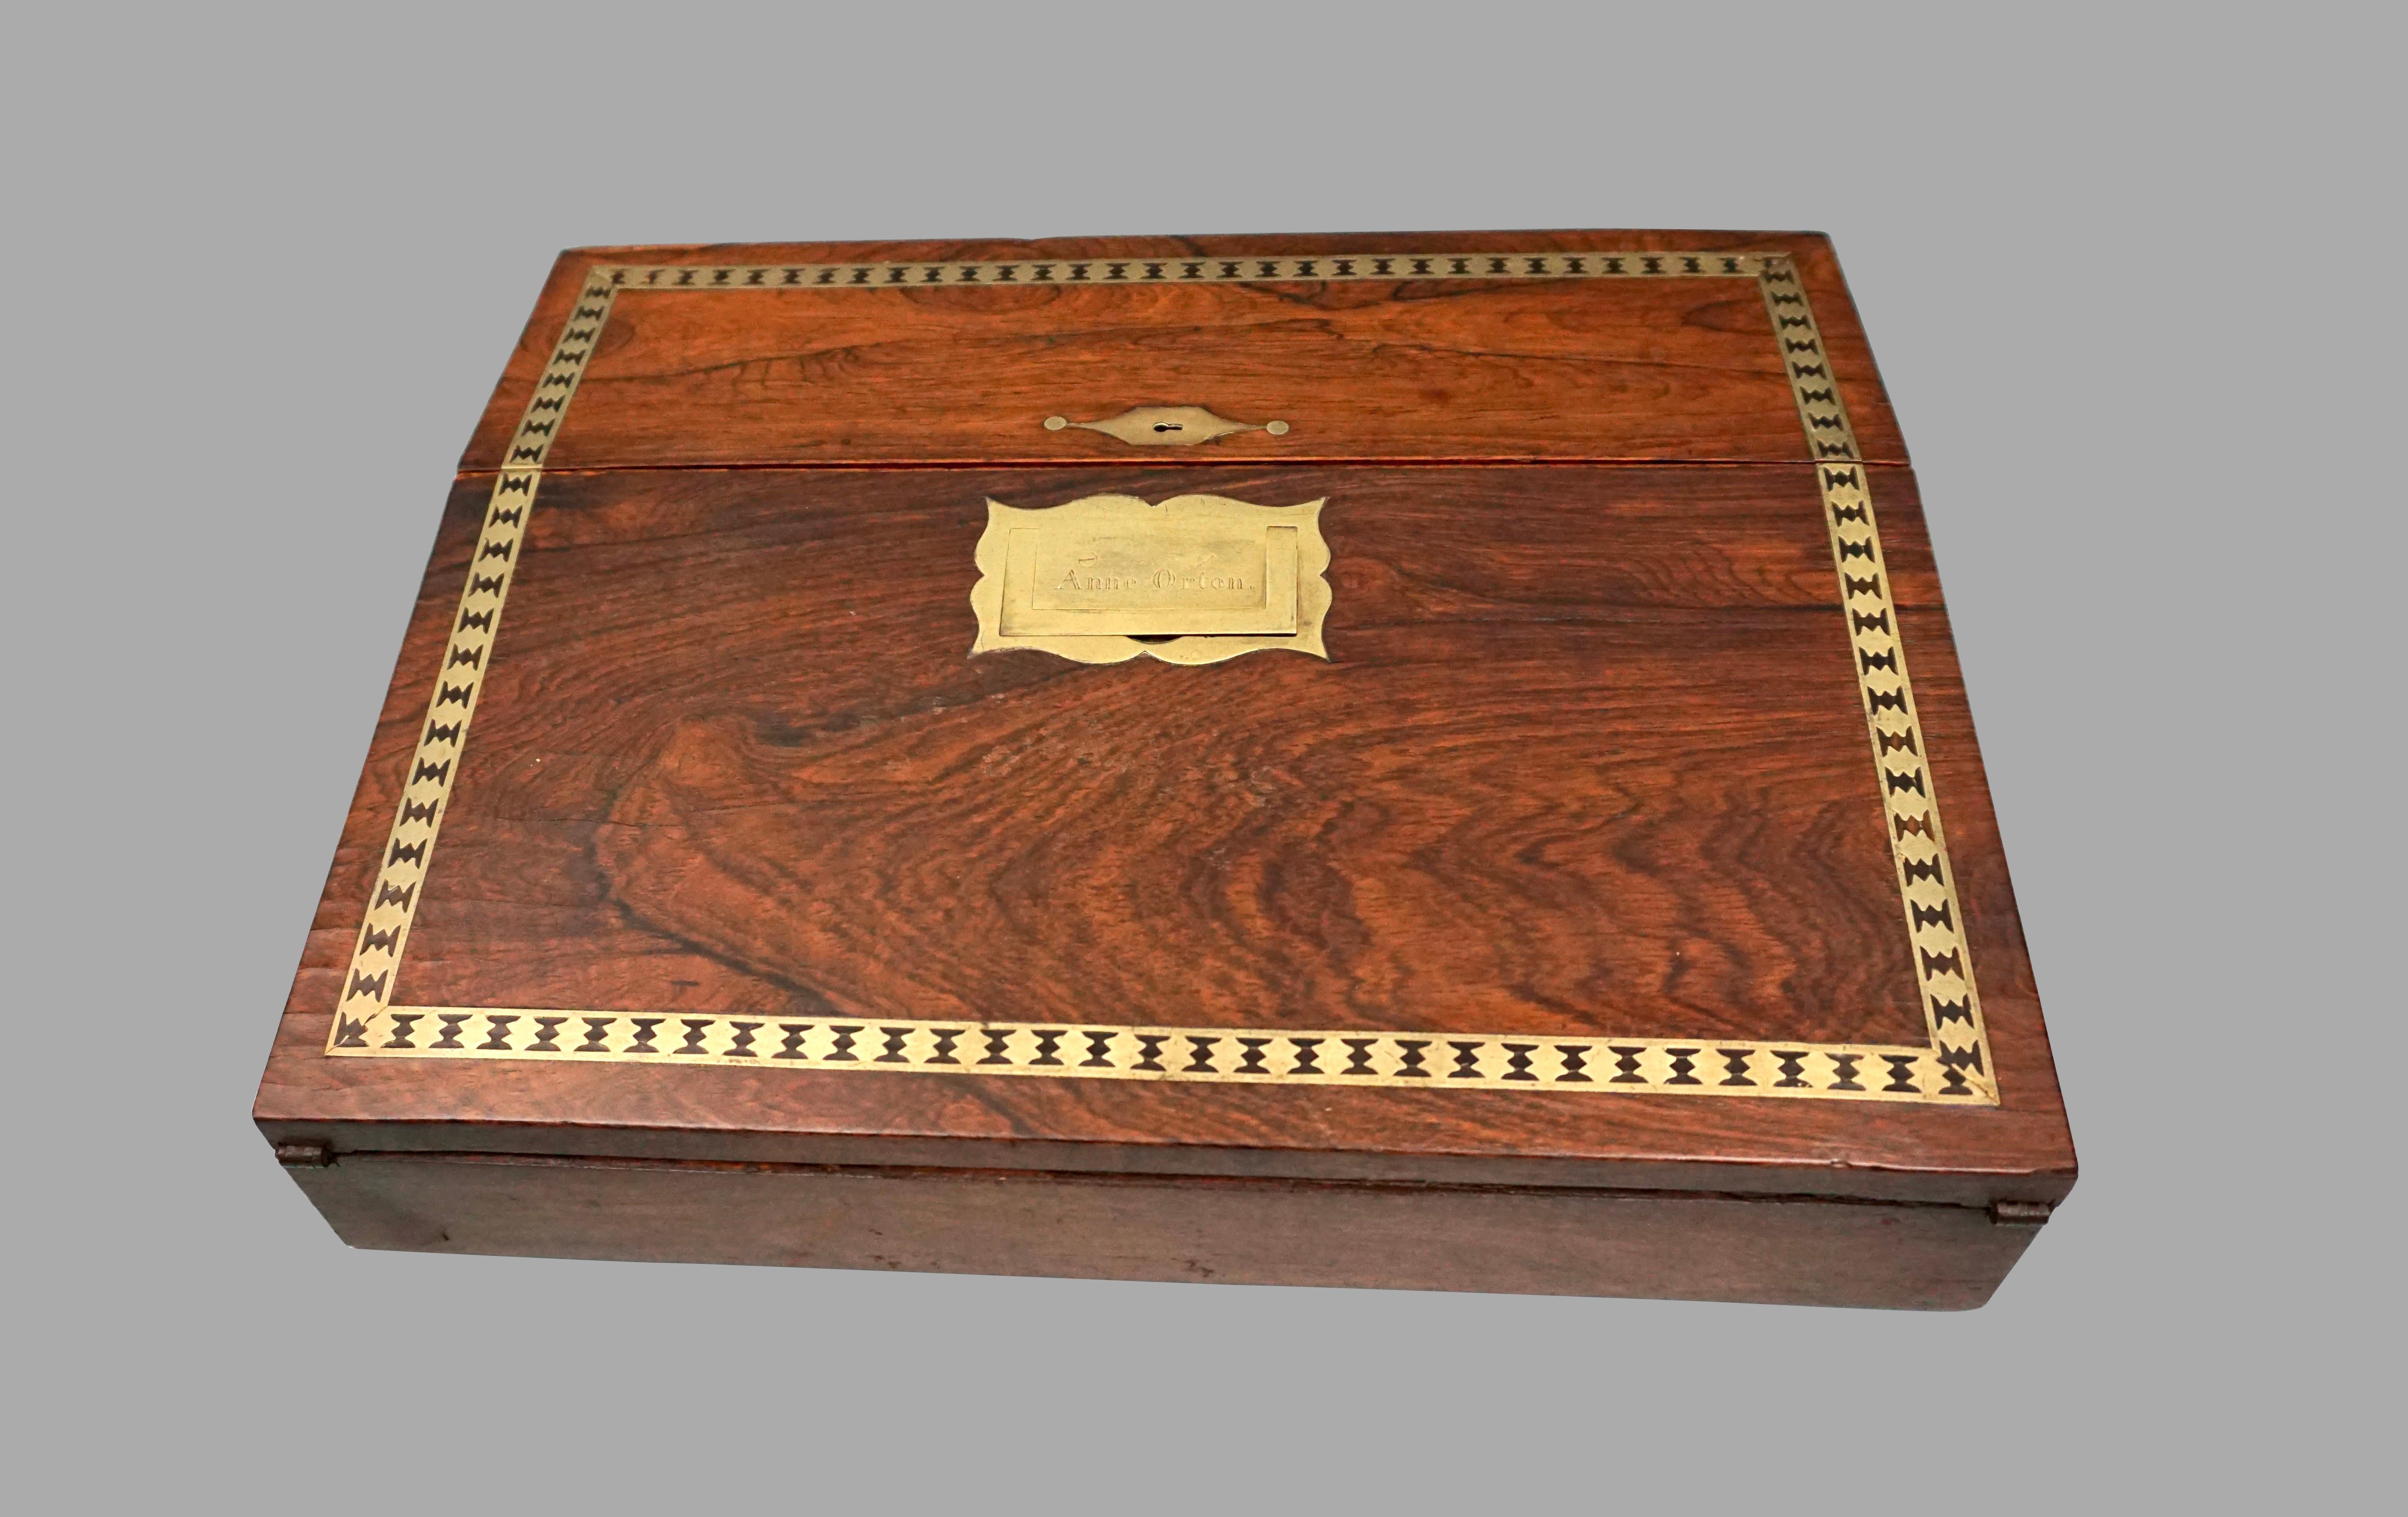 A fine quality brass inlaid Campaign style traveling desk with a recessed brass handle engraved with the name of its owner, Anne Orten. The piece opens to reveal a velvet lined writing surface and pen rest with spaces for 2 inkwells. This item is